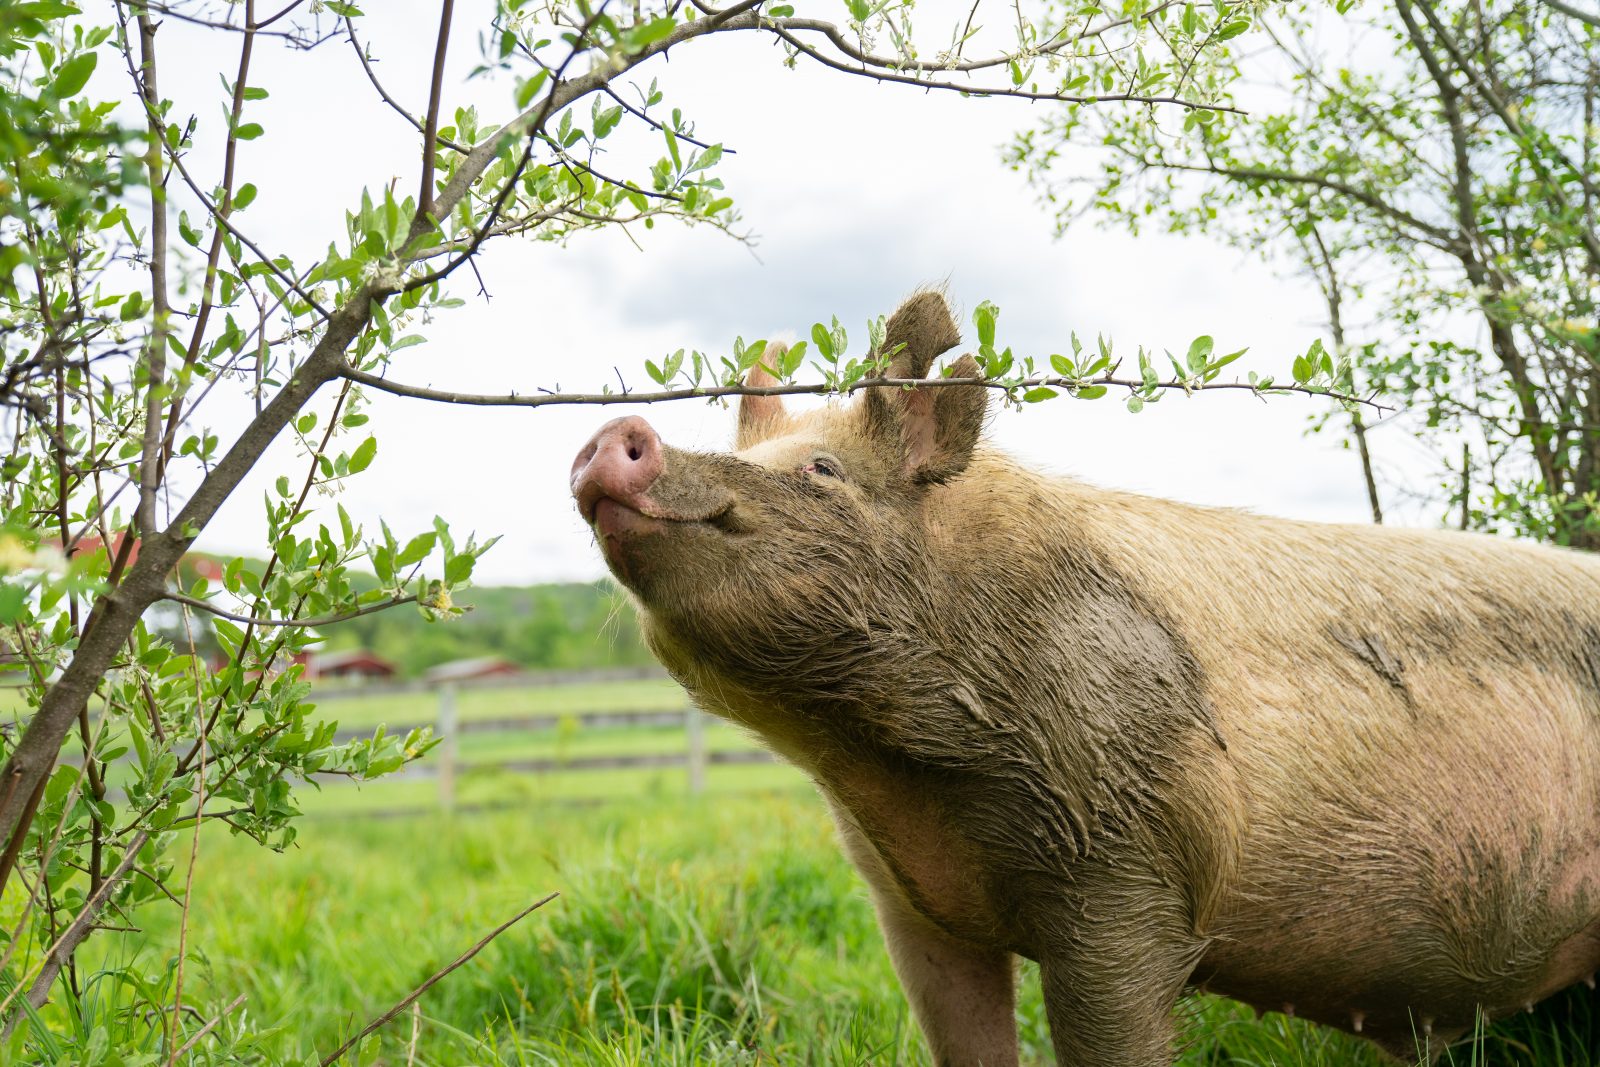 Jack pig inspects a tree branch at Farm Sanctuary